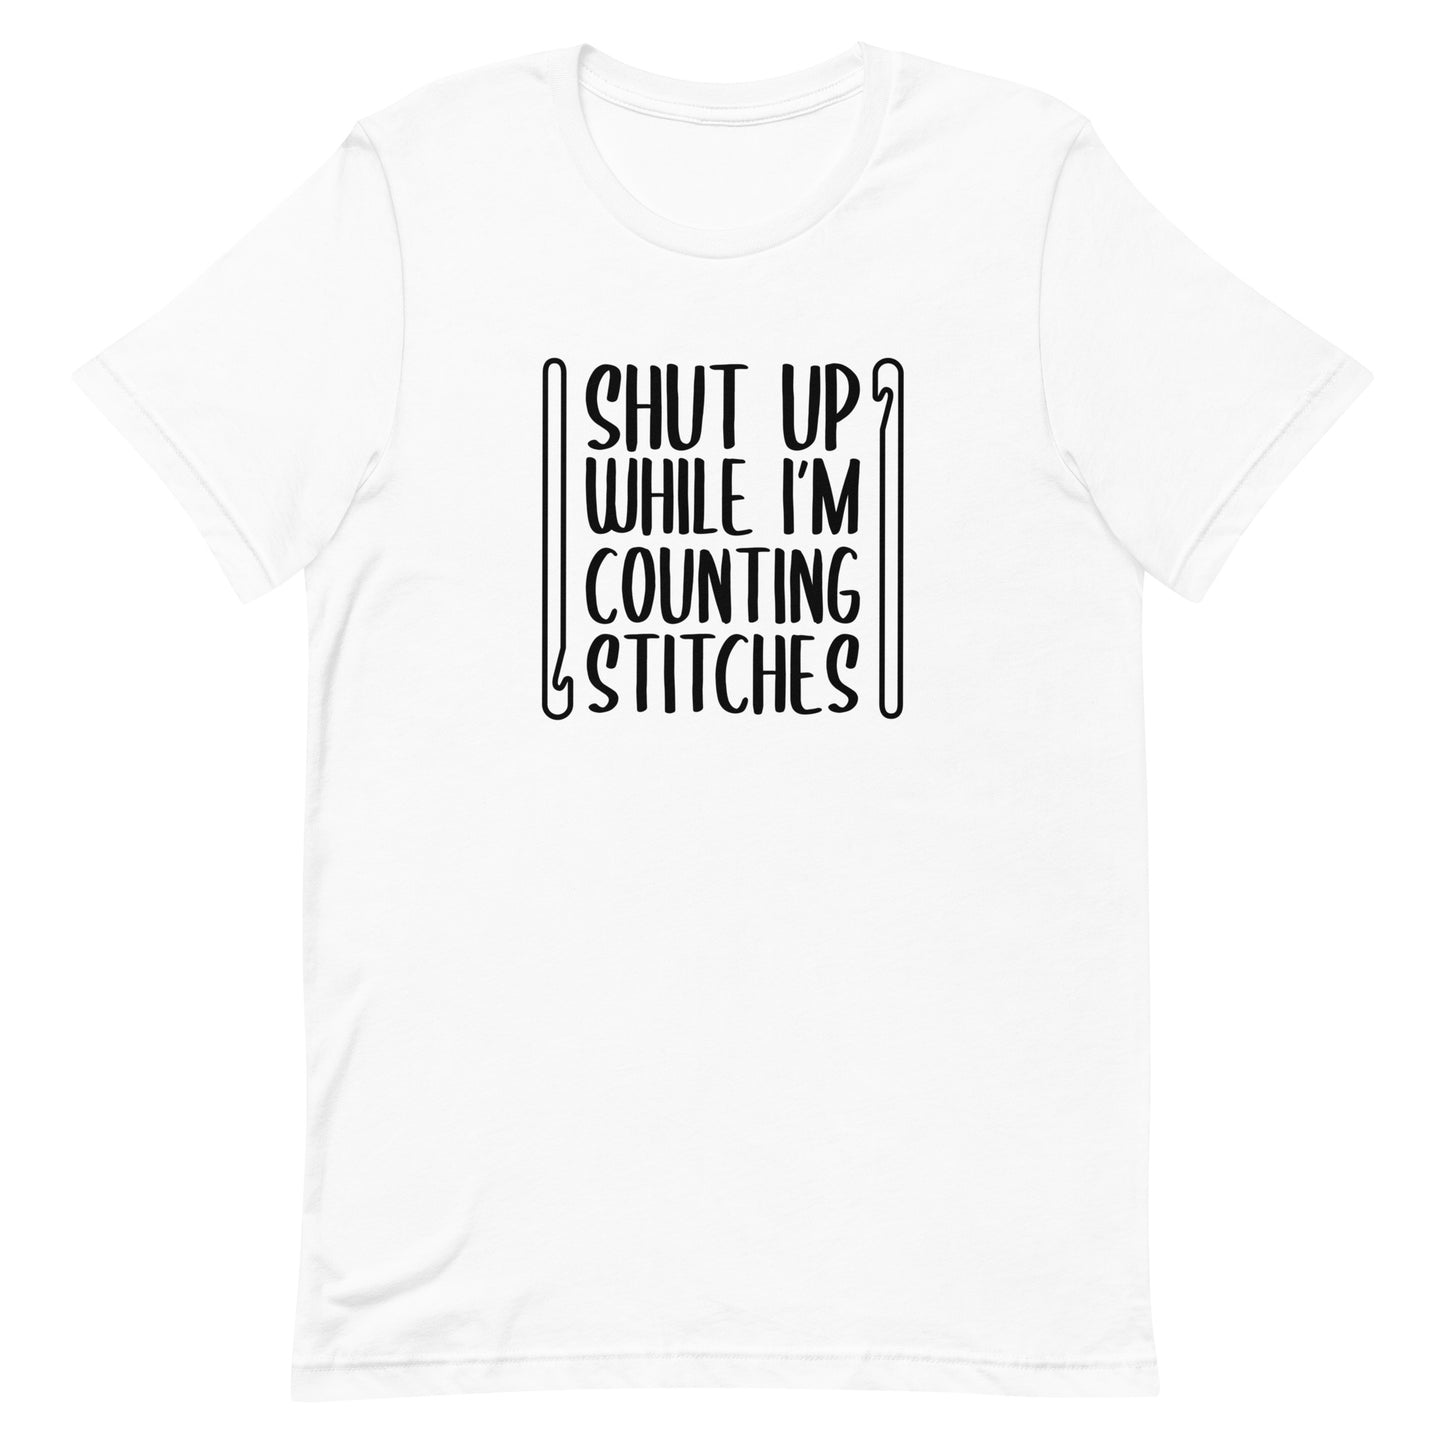 A white crewneck t-shirt featuring black text that reads "Shut up while I'm counting stitches." The text is framed by a crochet hook to the left and right.